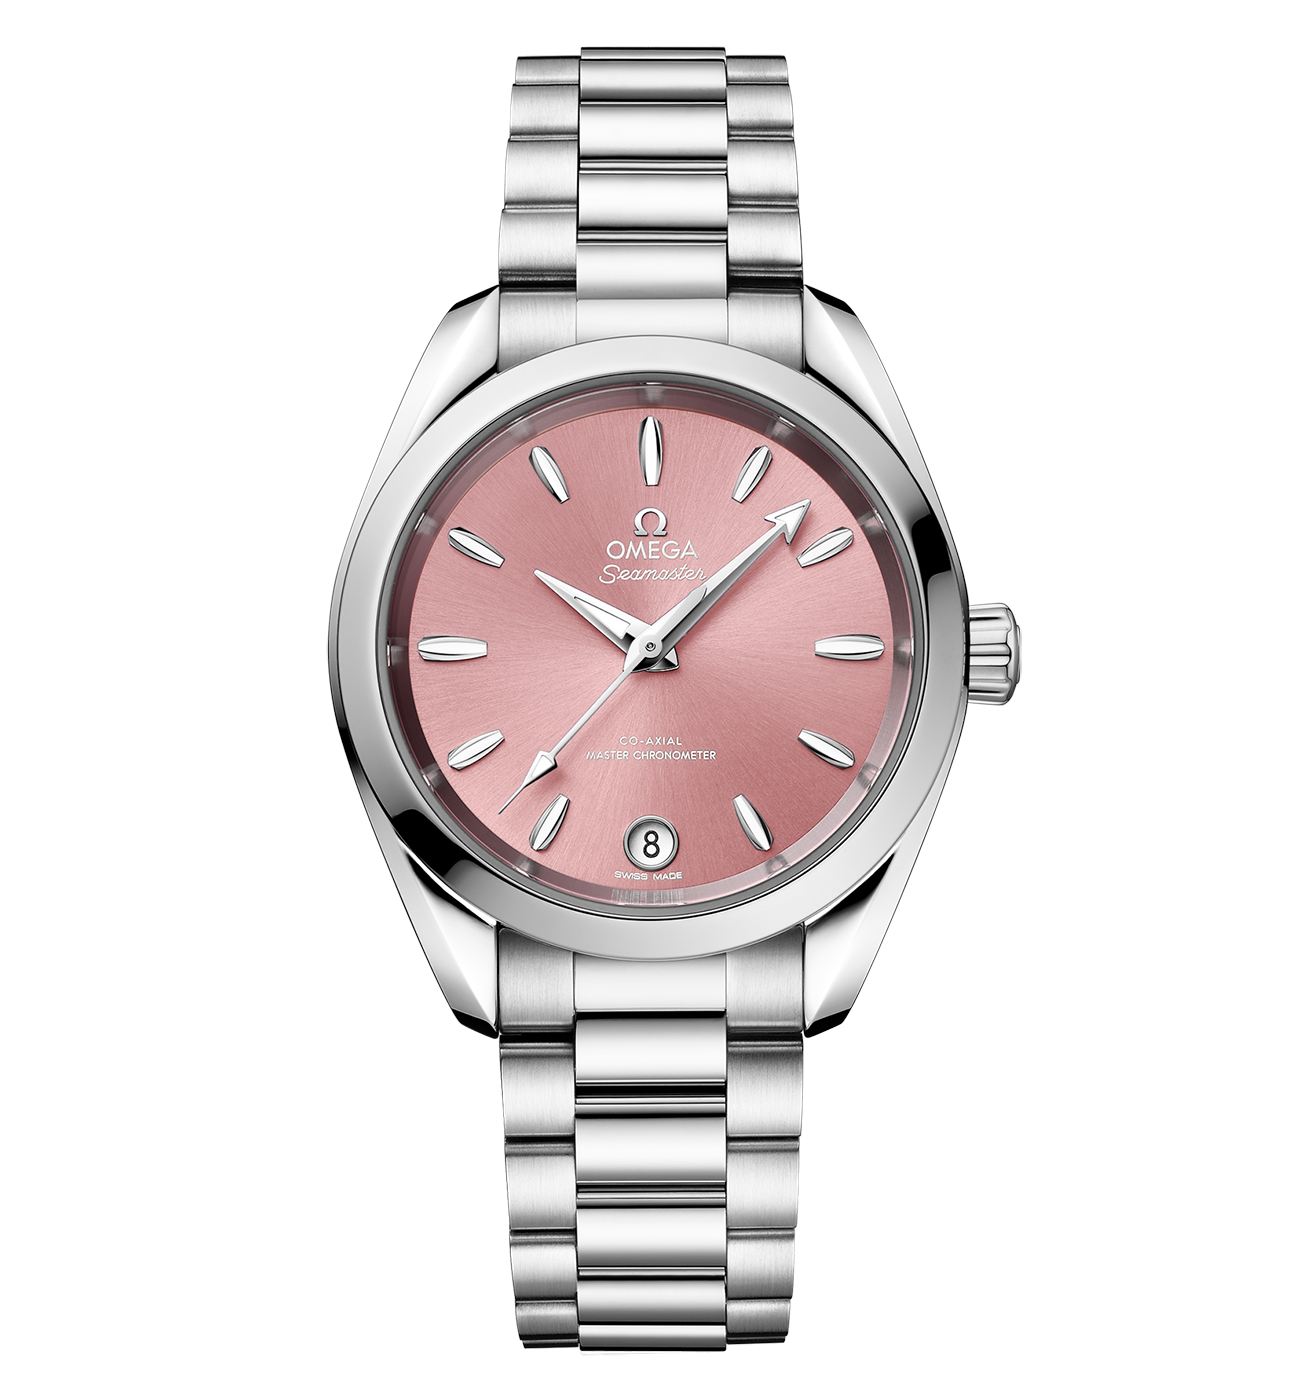 OMEGA Seamaster Aqua Terra 150m Co-Axial Master Chronometer, 34mm with Shell Pink Dial